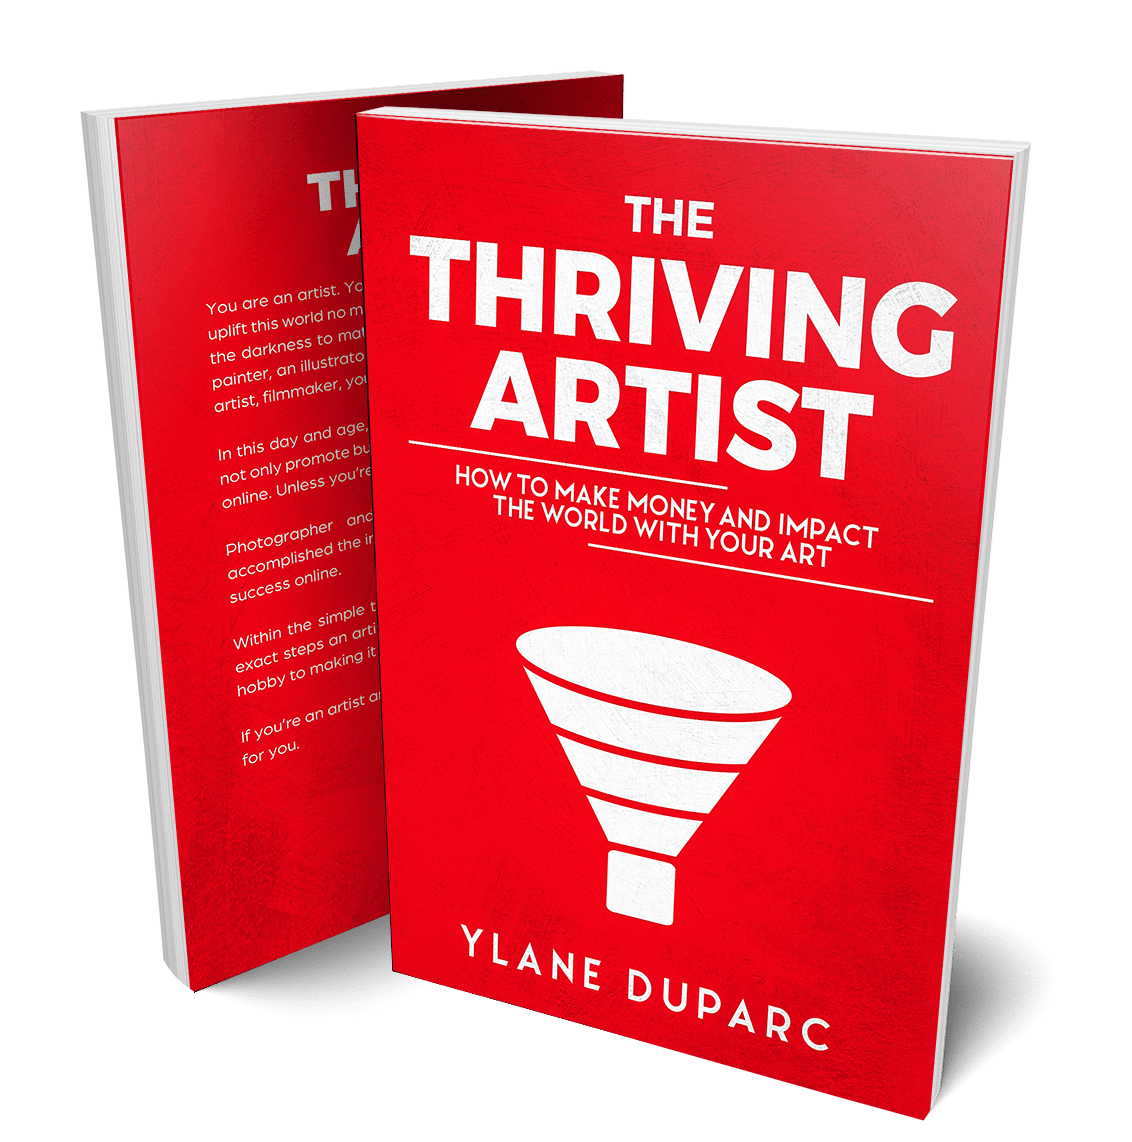 [GET] The Thriving Artist – Make Money and Impact The World With Your Art Download